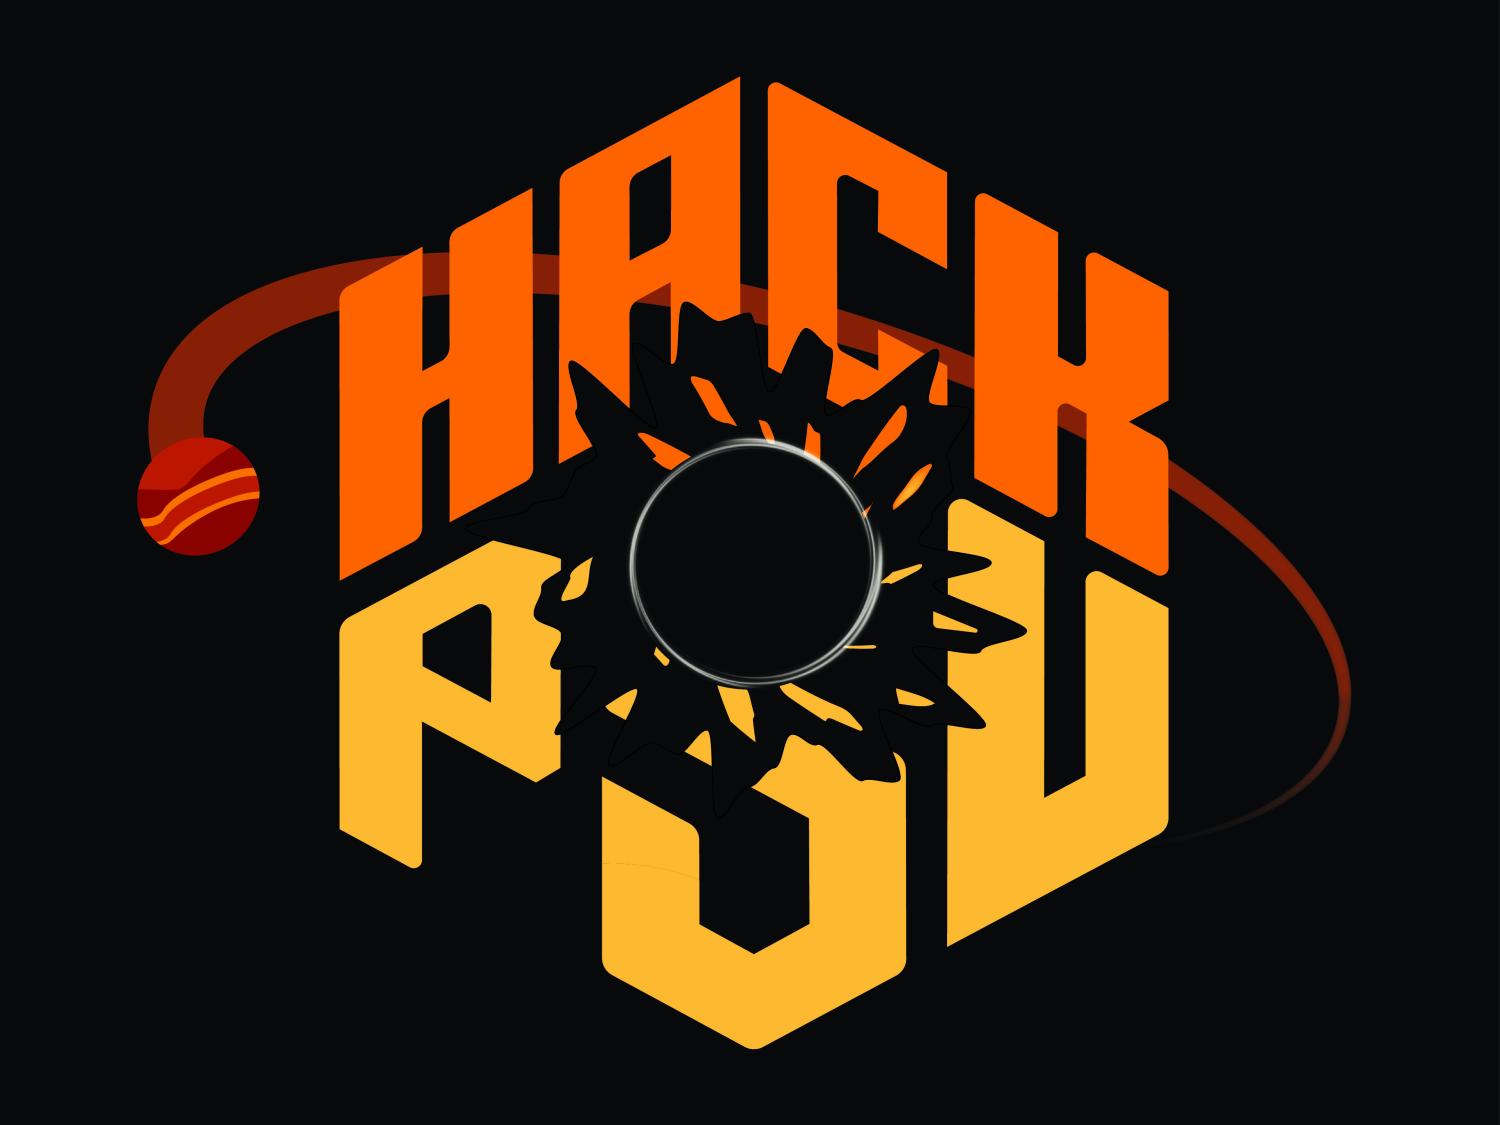 Students from around the world participate in a virtual version of HackPSU